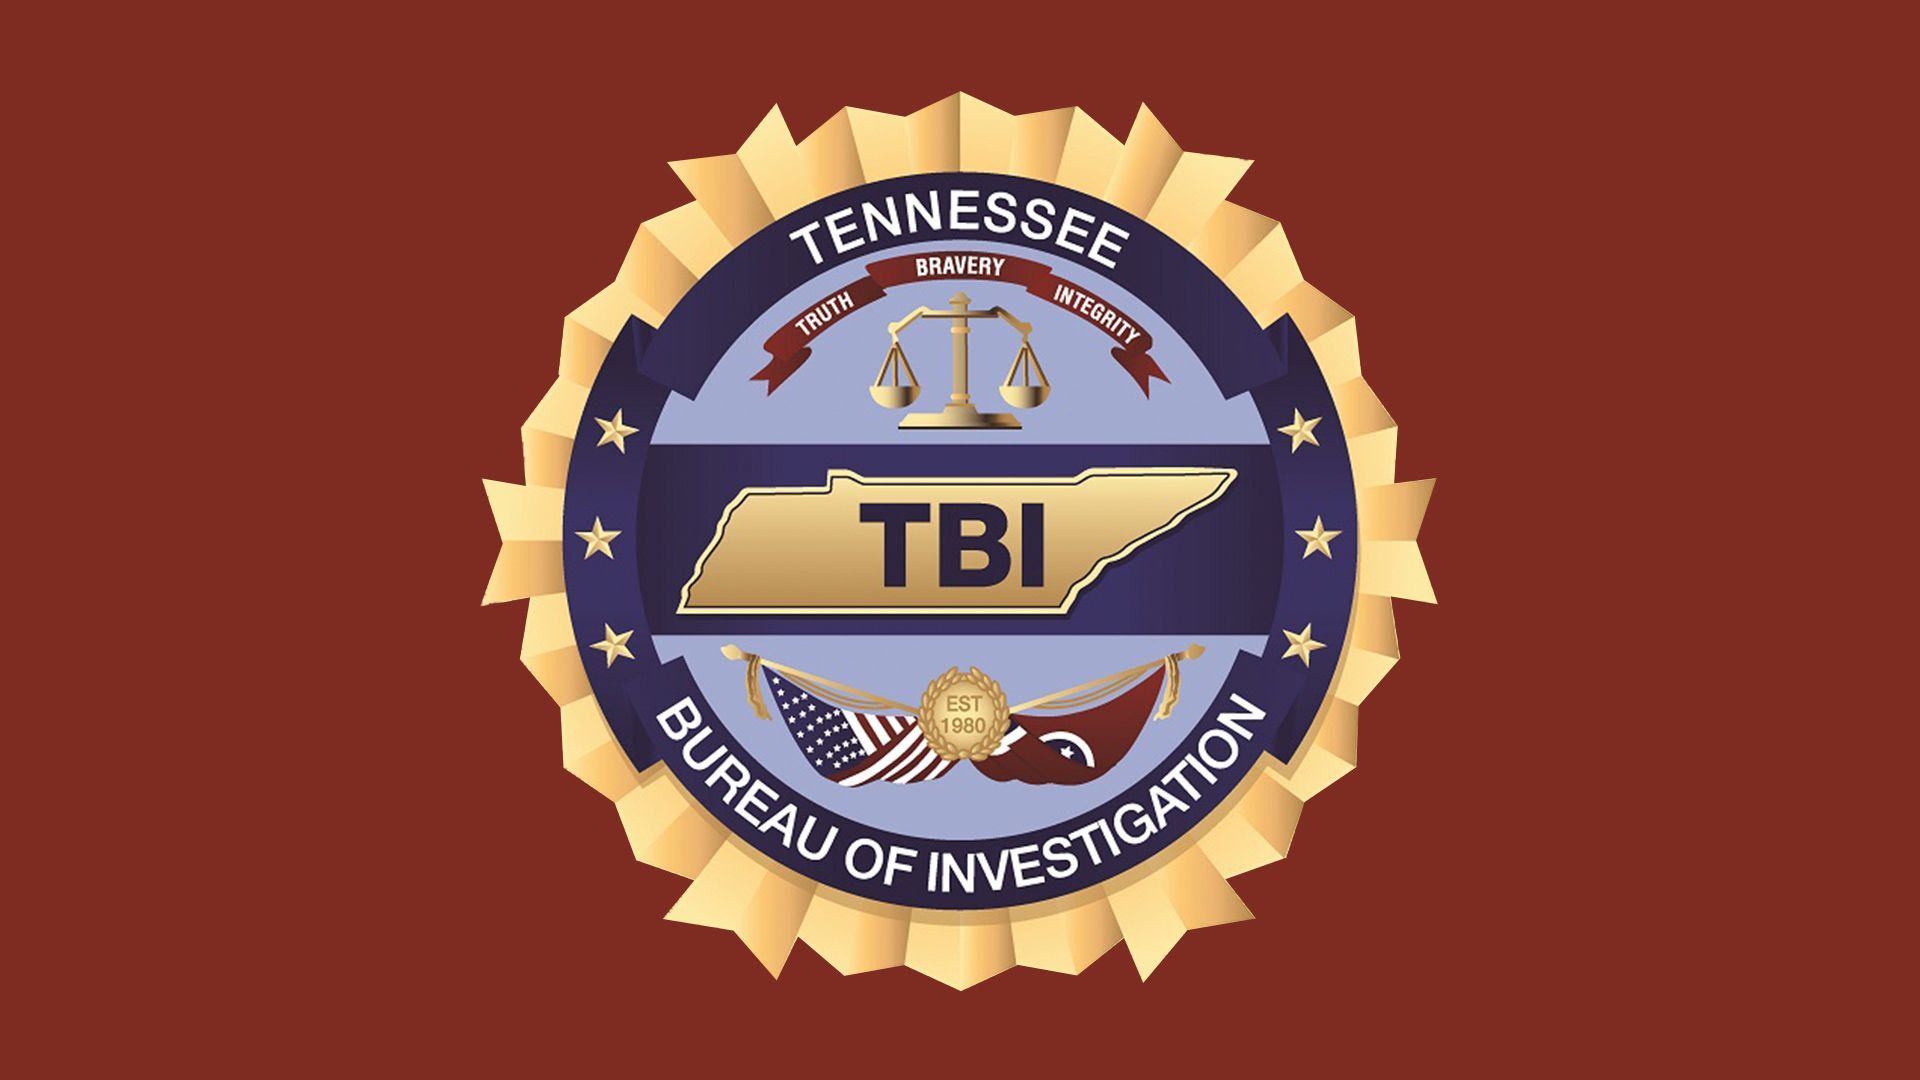 The logo of the Tennessee Bureau of Investigation on a red background